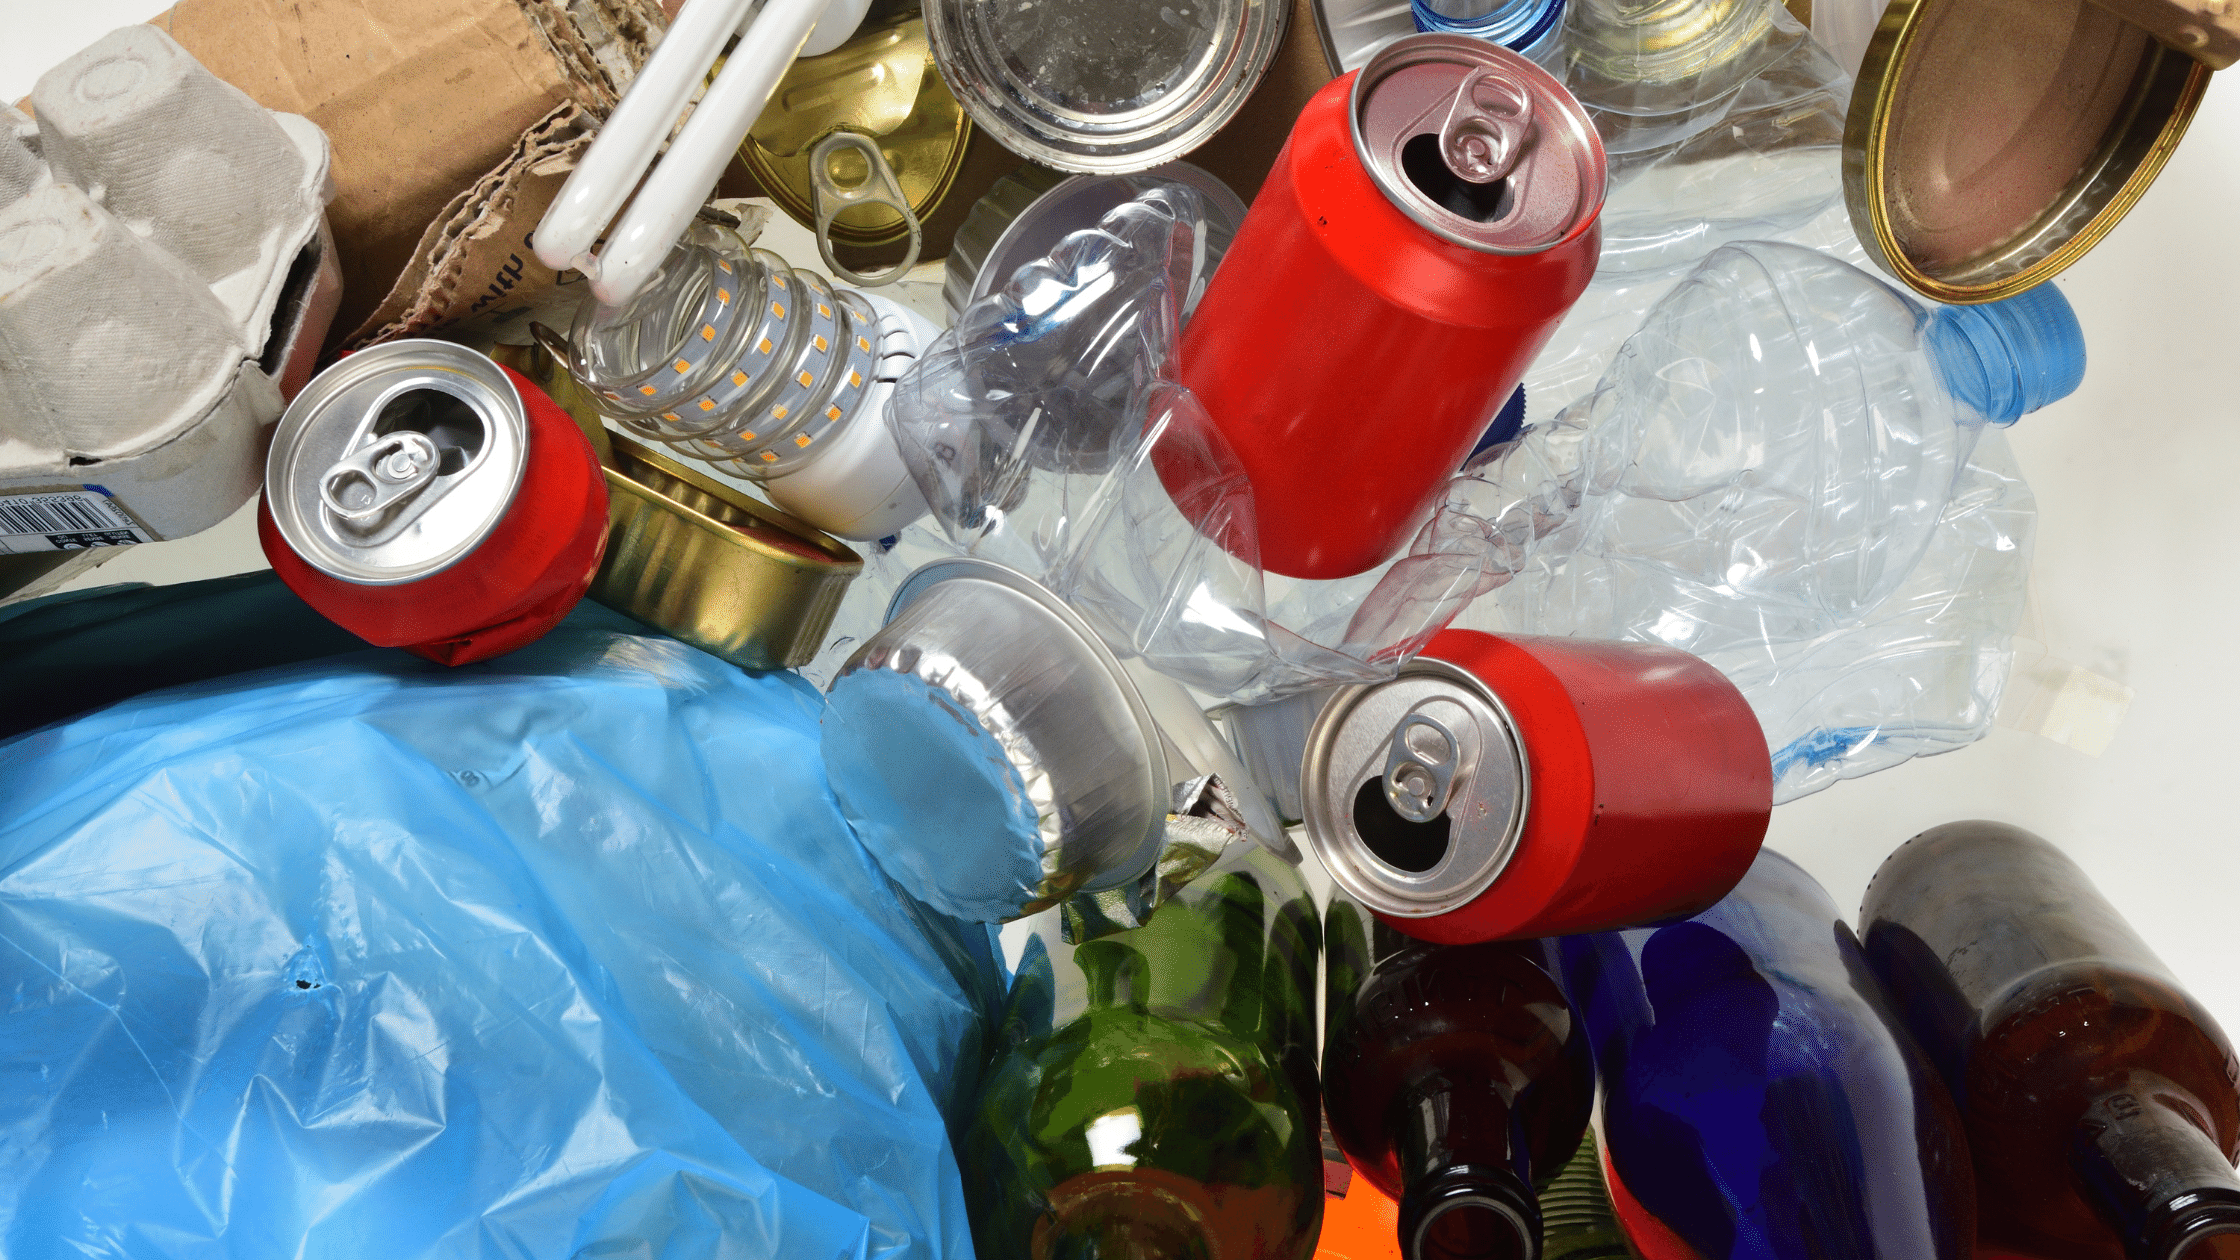 image showing pile of mixed recyclables blue plastic bag, cans, plastic bottles, lightbulb, glass bottles, etc